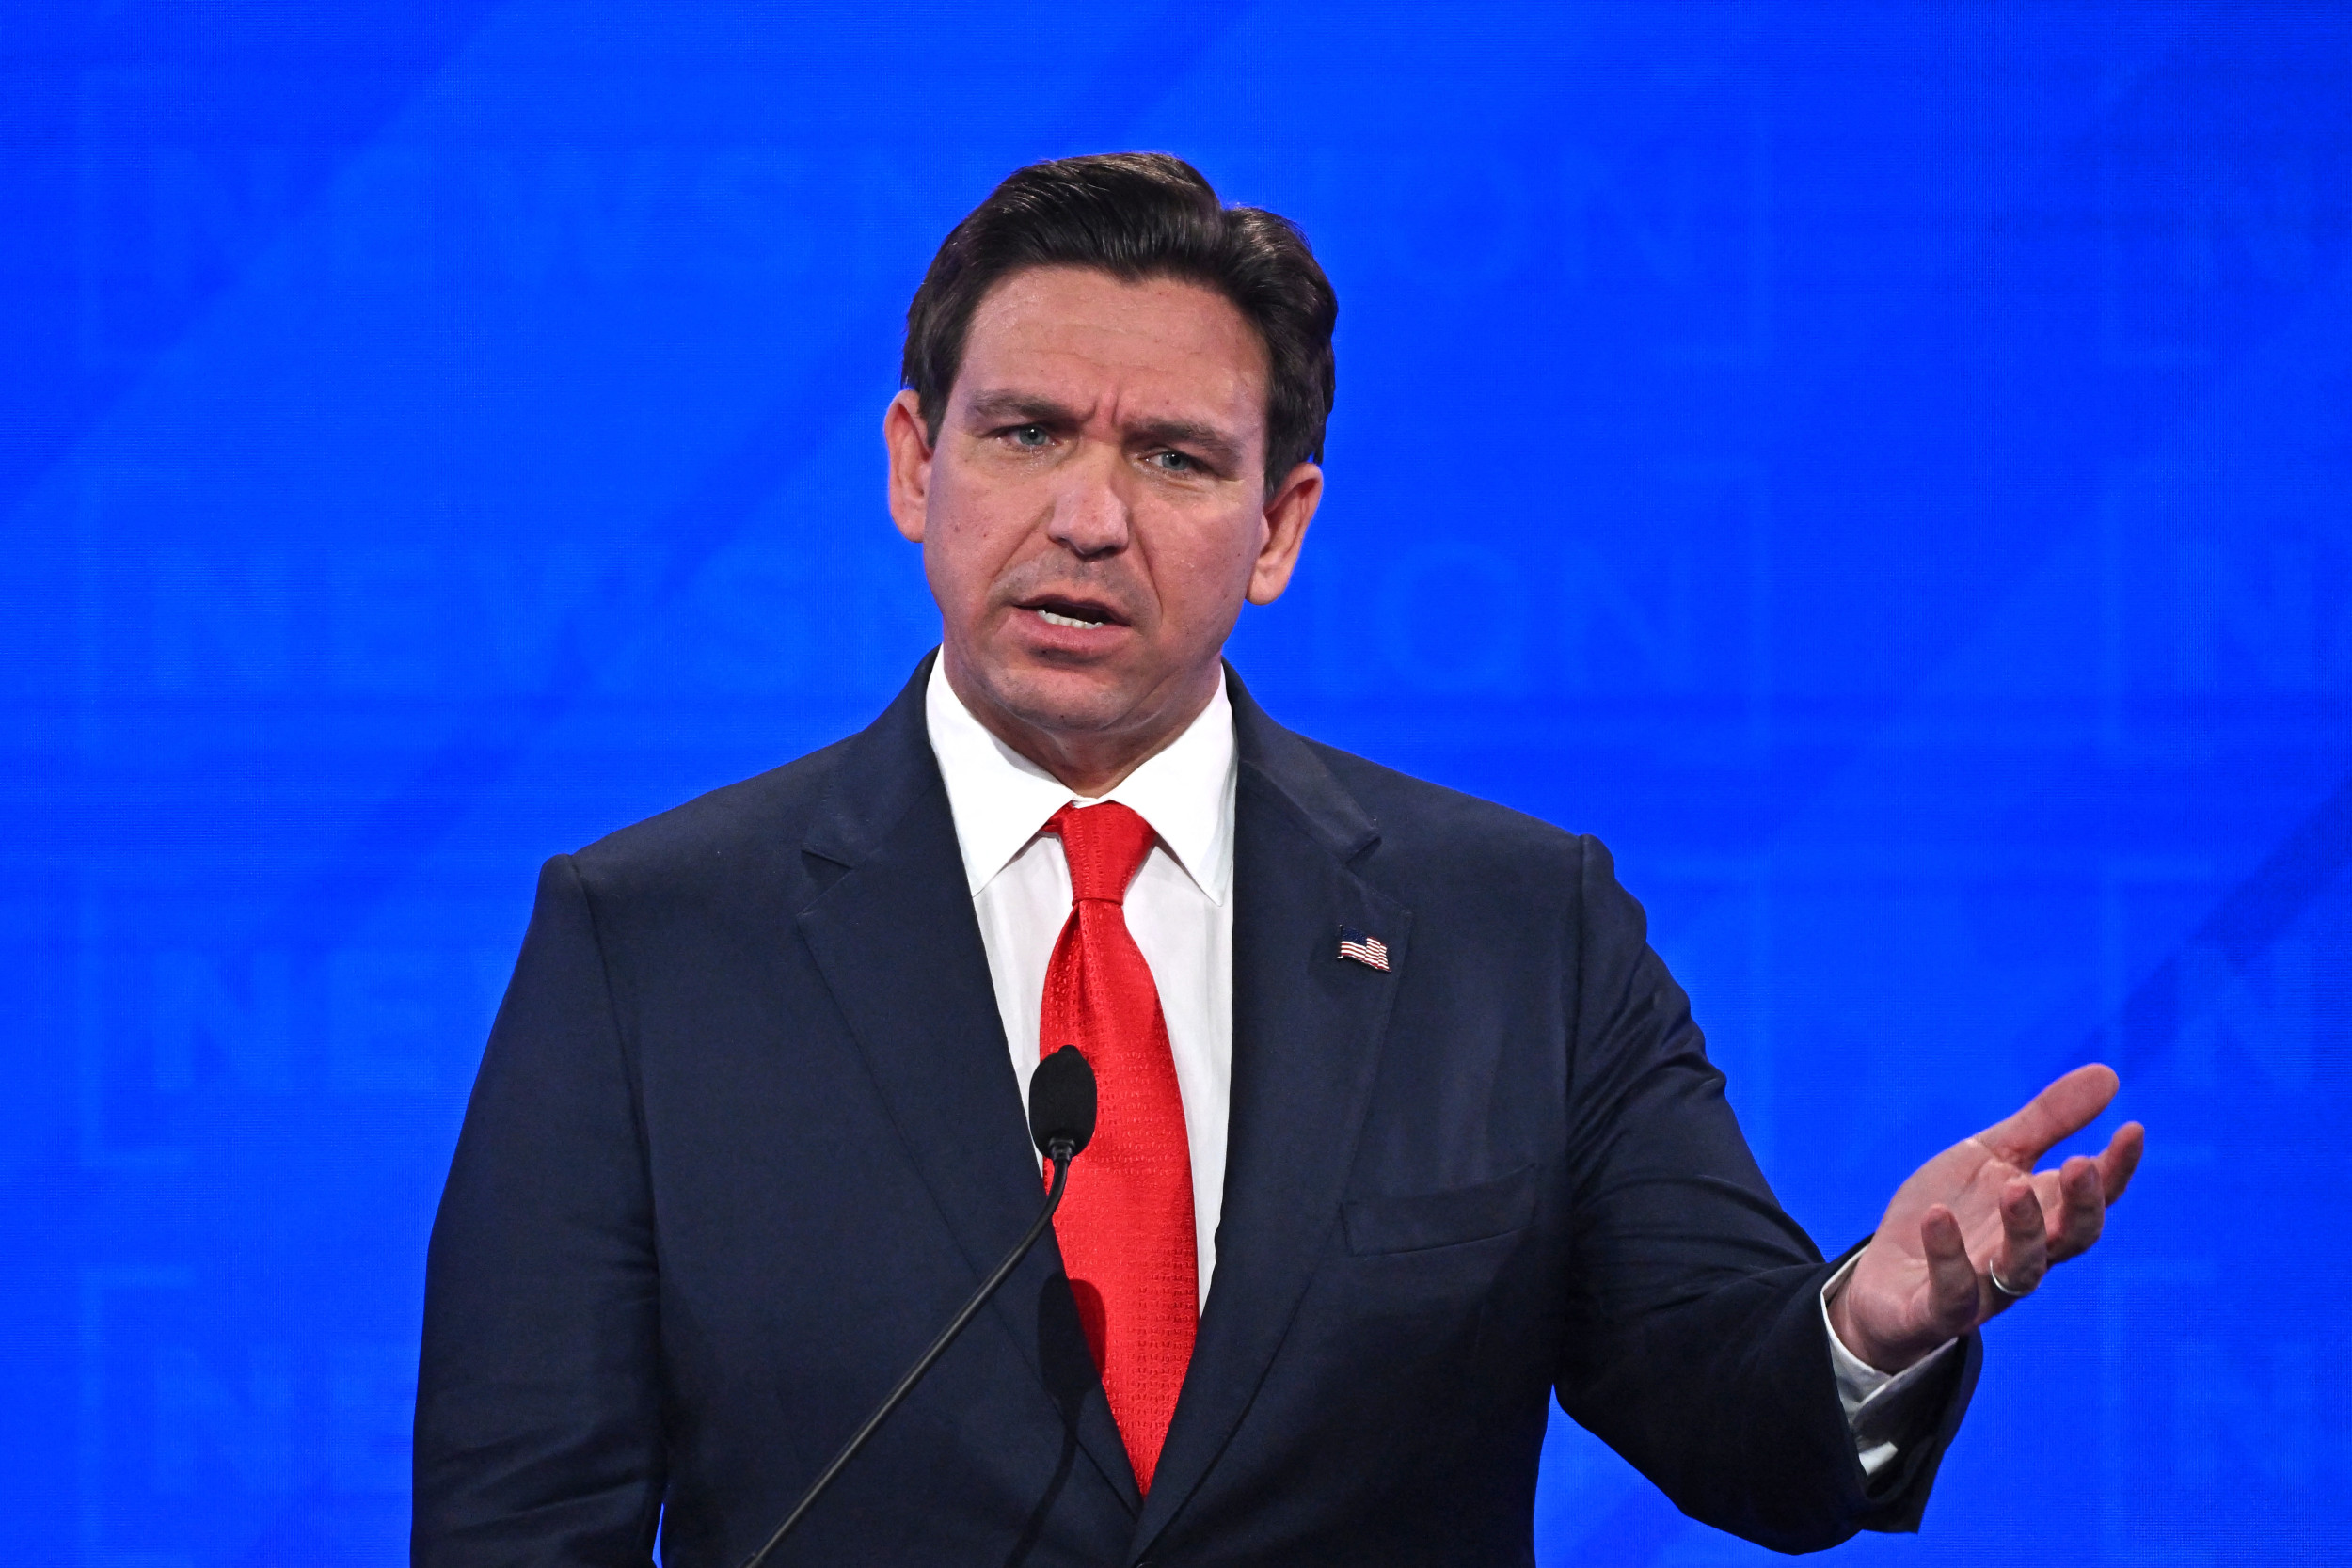 Ron DeSantis brutally heckled during Iowa campaign event